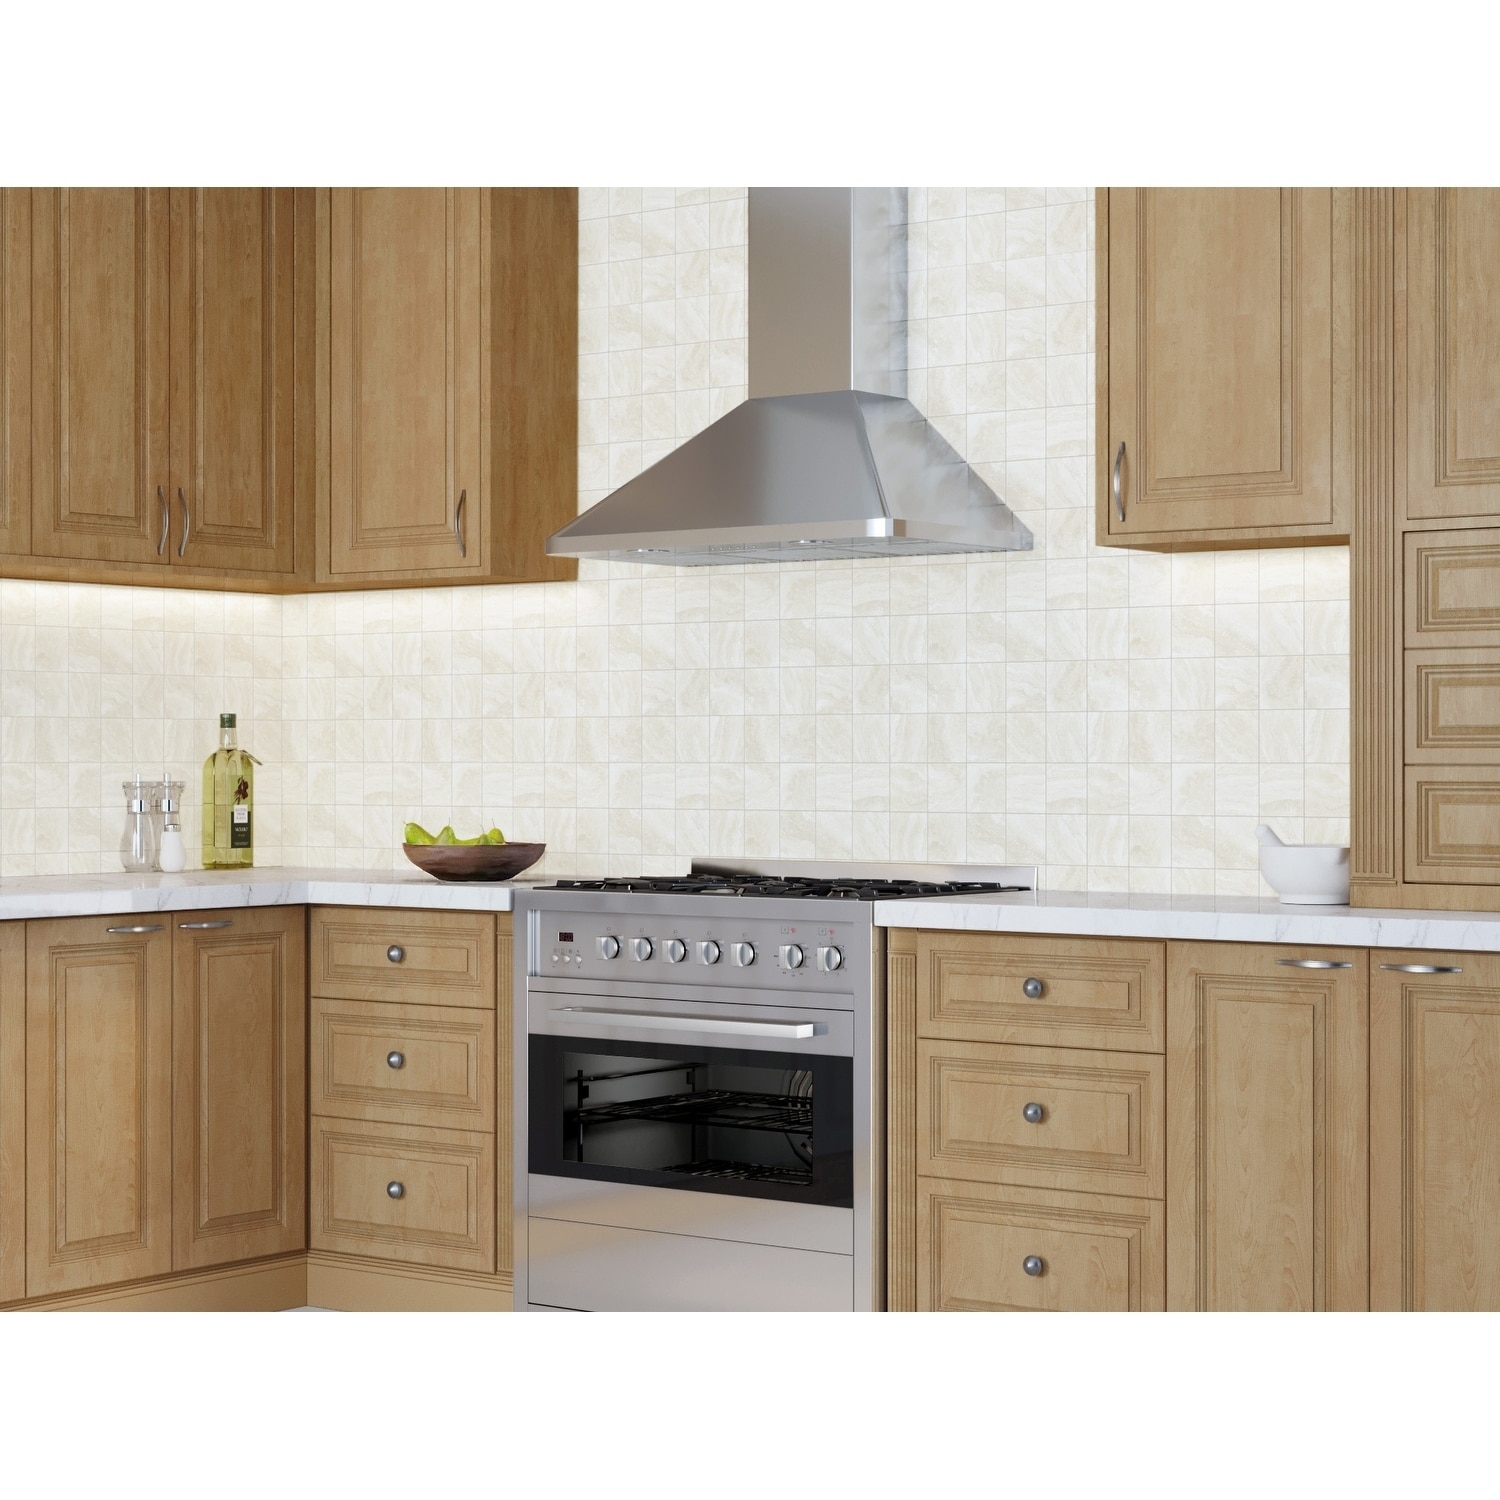 Ancona Wpr630 30 In Wall Pyramid Chef Range Hood In Stainless Steel On Sale Overstock 19975437